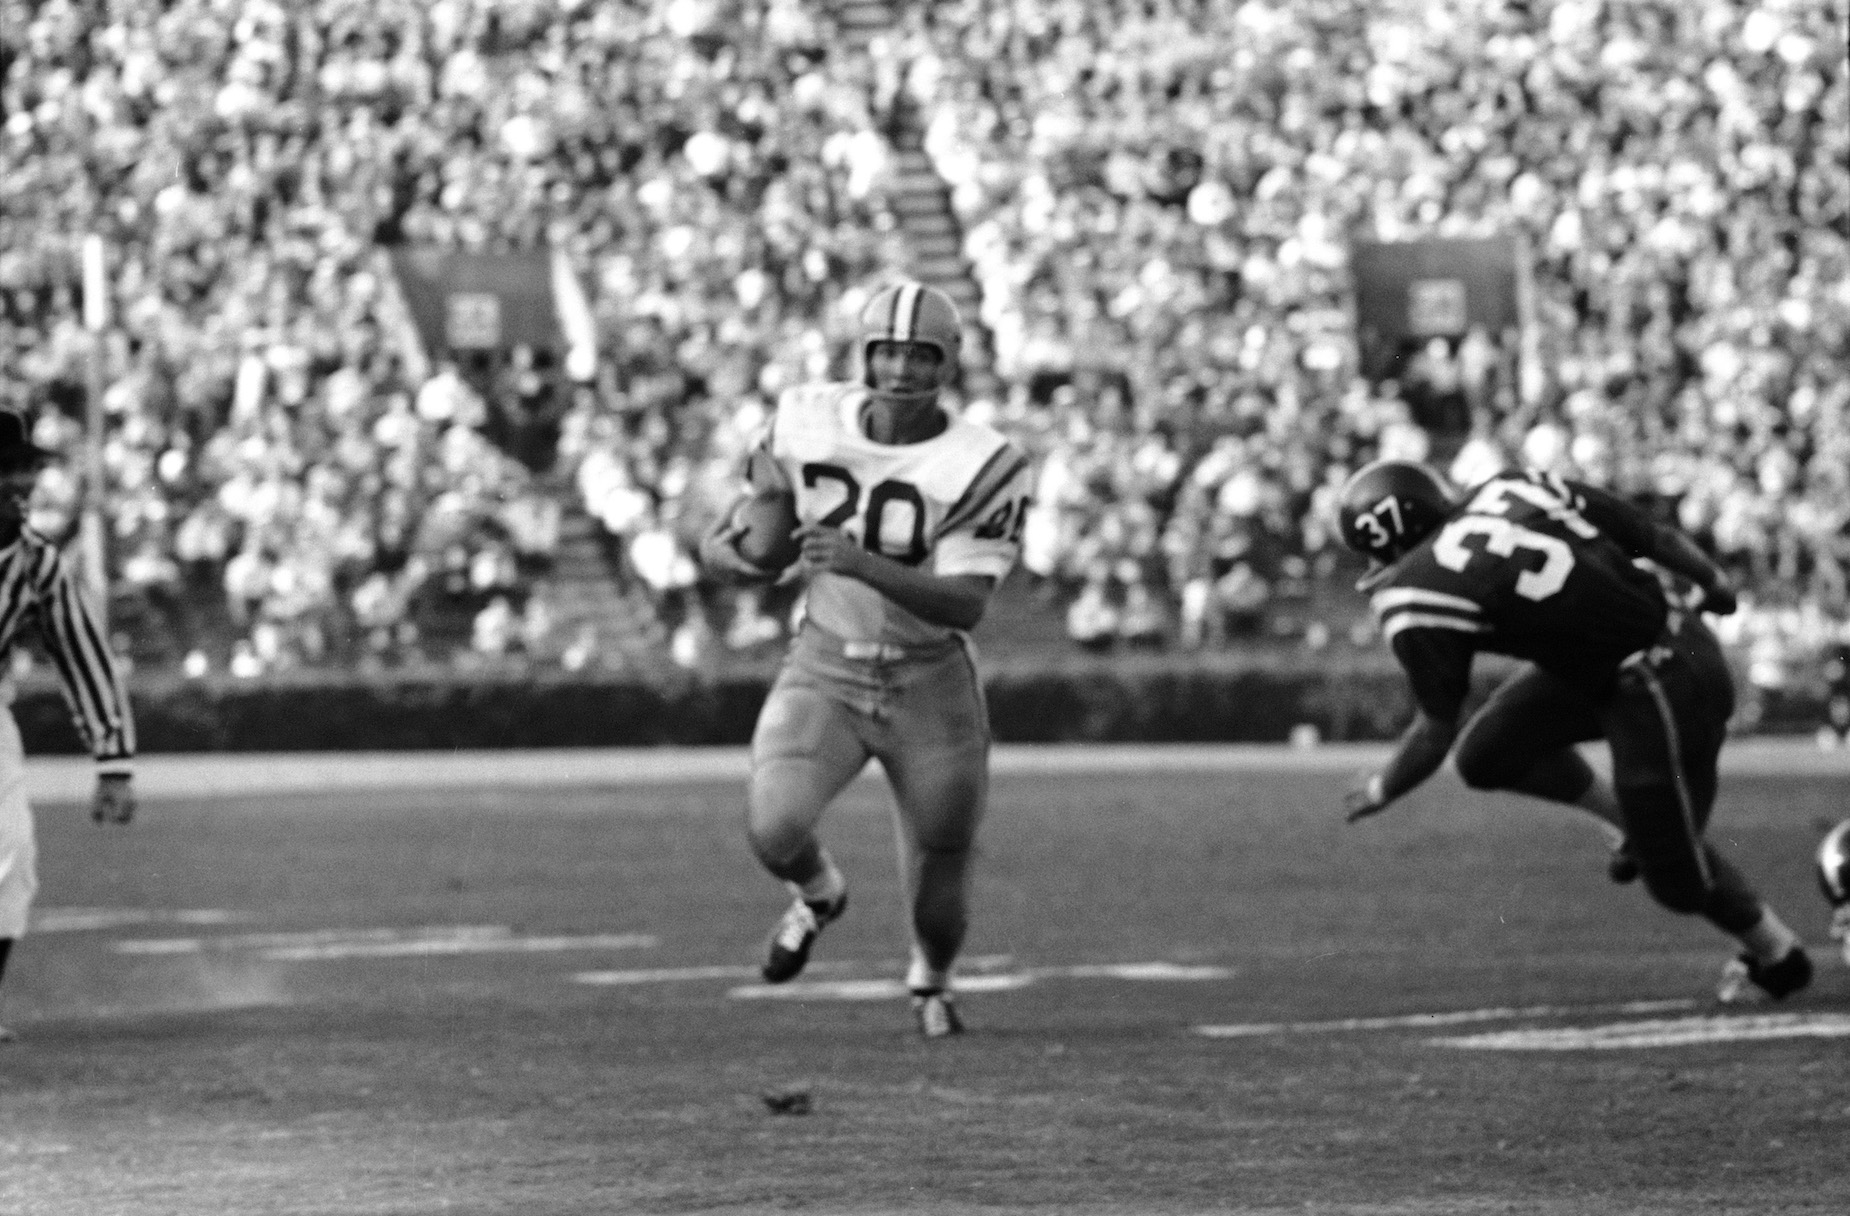 LSU’s Billy Cannon Won the Heisman Trophy, Played Pro Football, and Counterfeited $6 Million Before Finding Redemption as a Prison Dentist